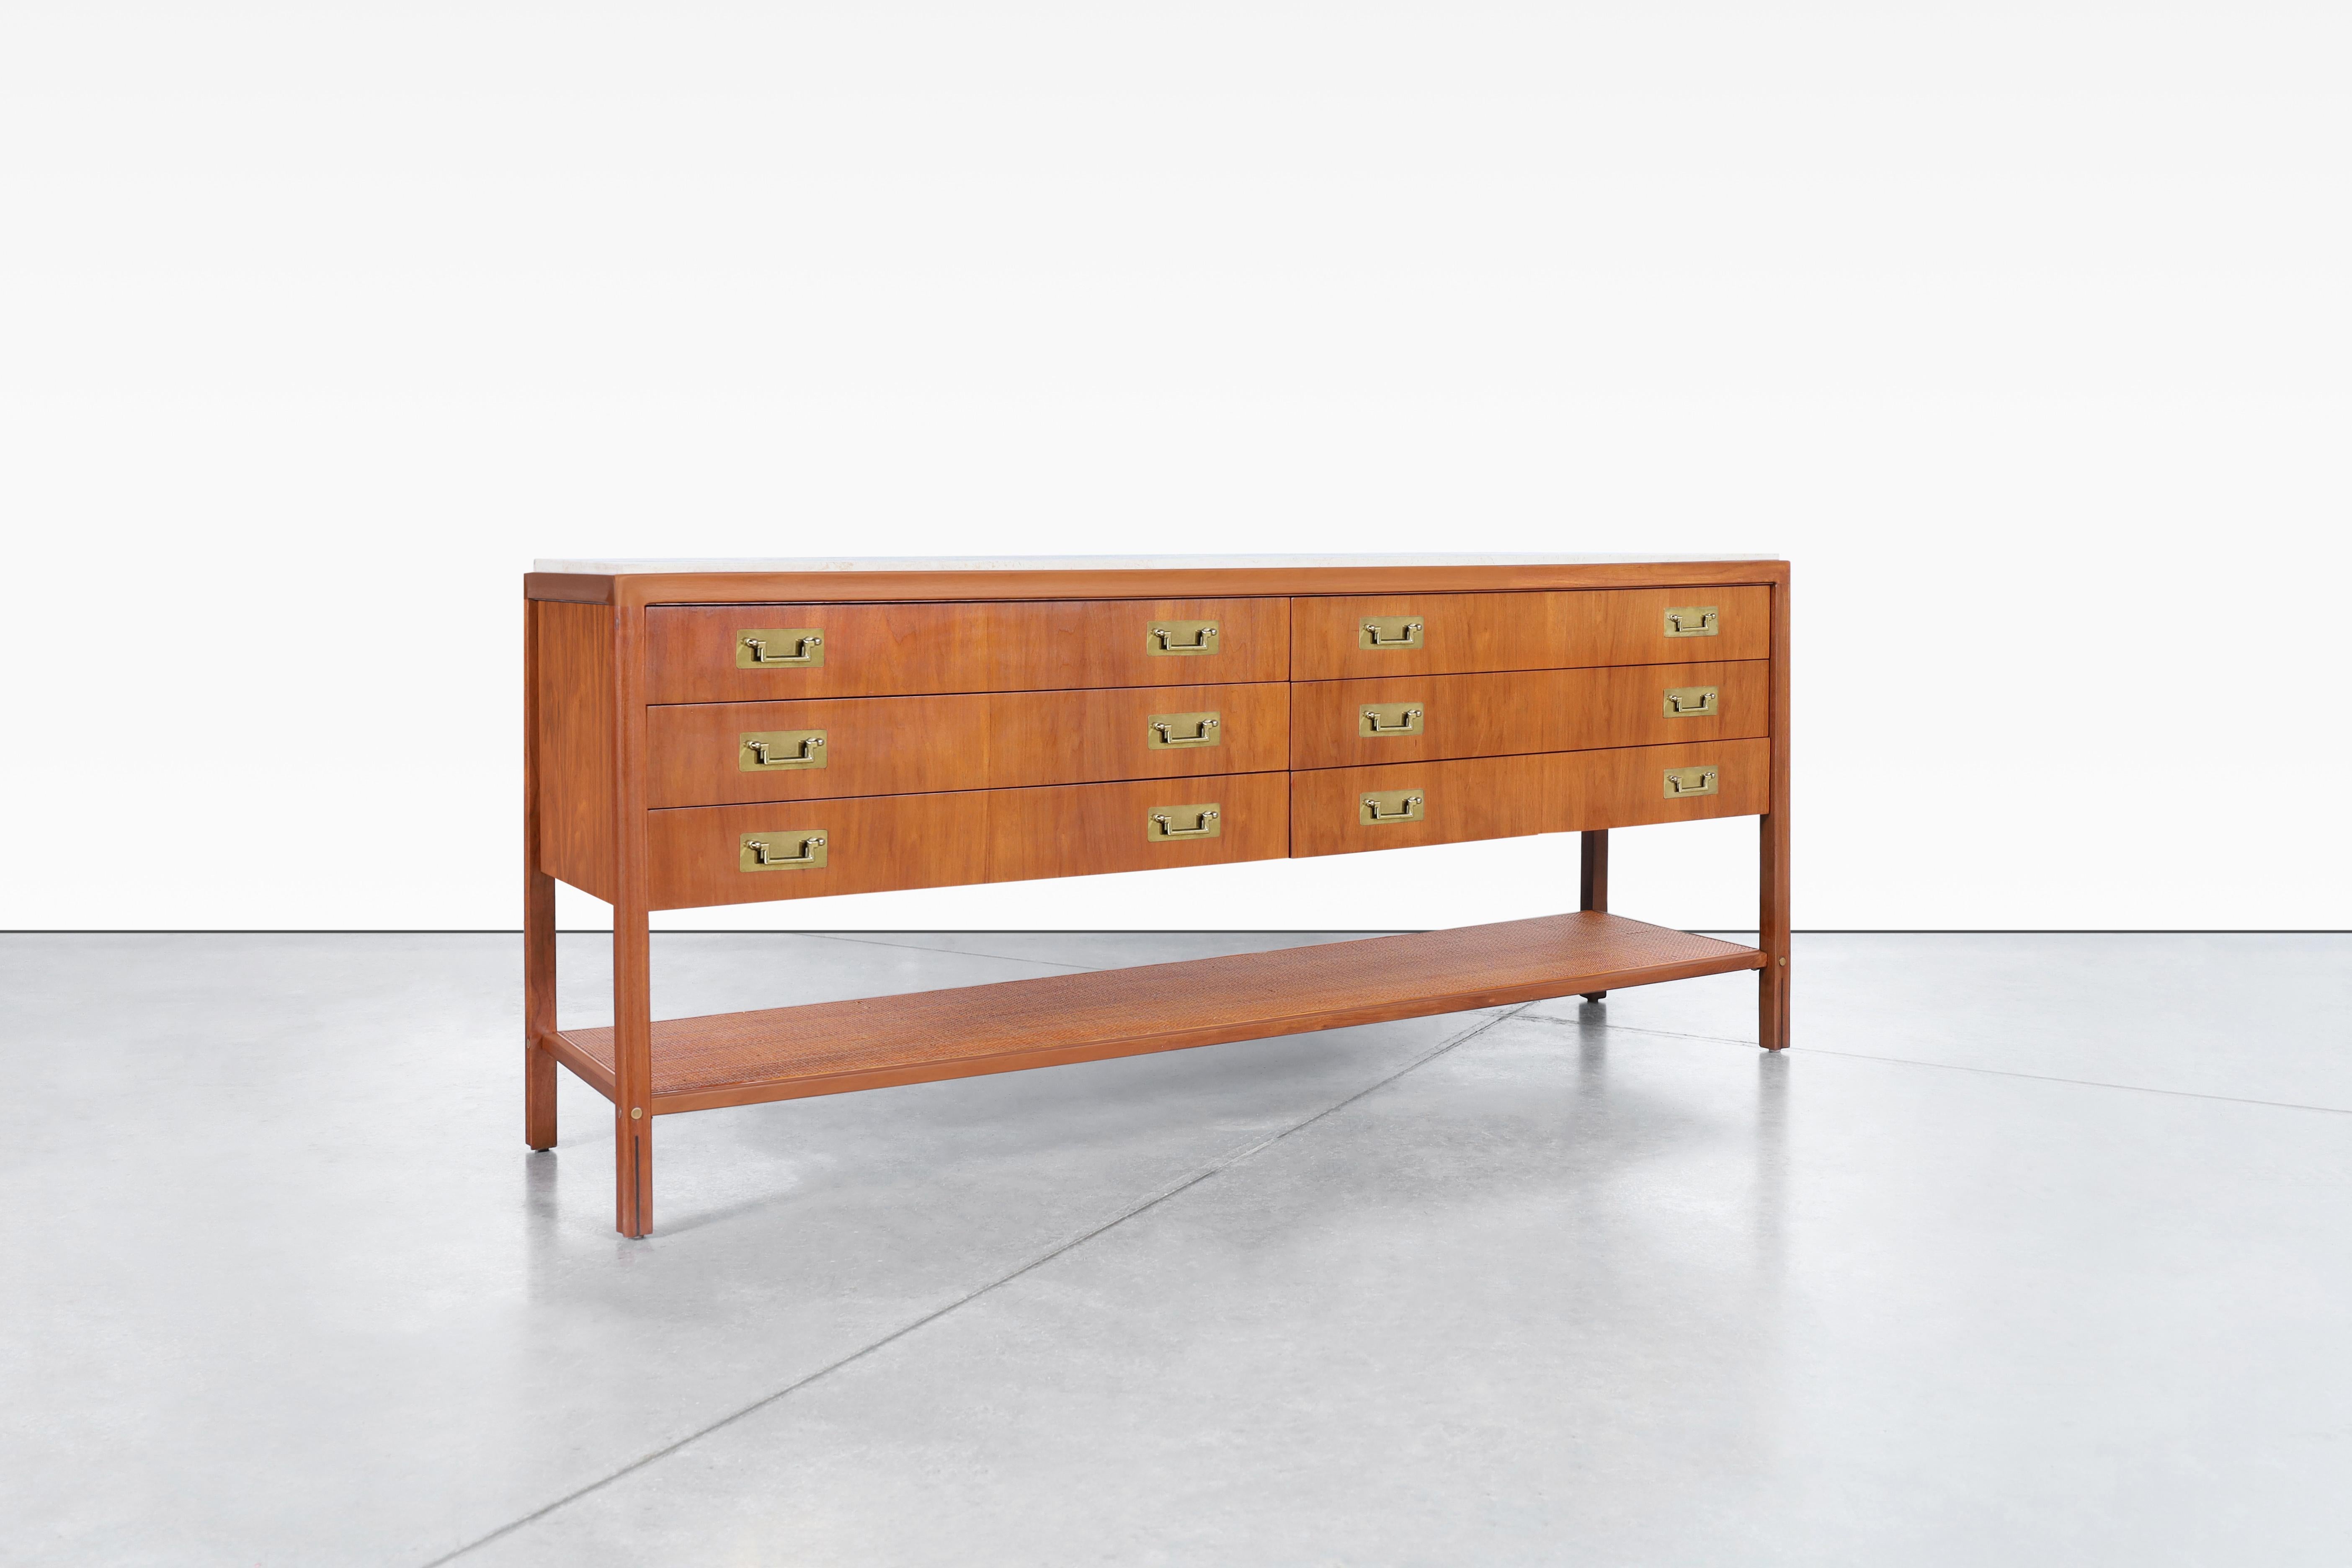 Wonderful vintage walnut and travertine sideboard designed by Gerry Zanck for Gregori Furniture in the United States, circa 1960s. This walnut sideboard is a true masterpiece, crafted to perfection with impeccable attention to detail. Its solid